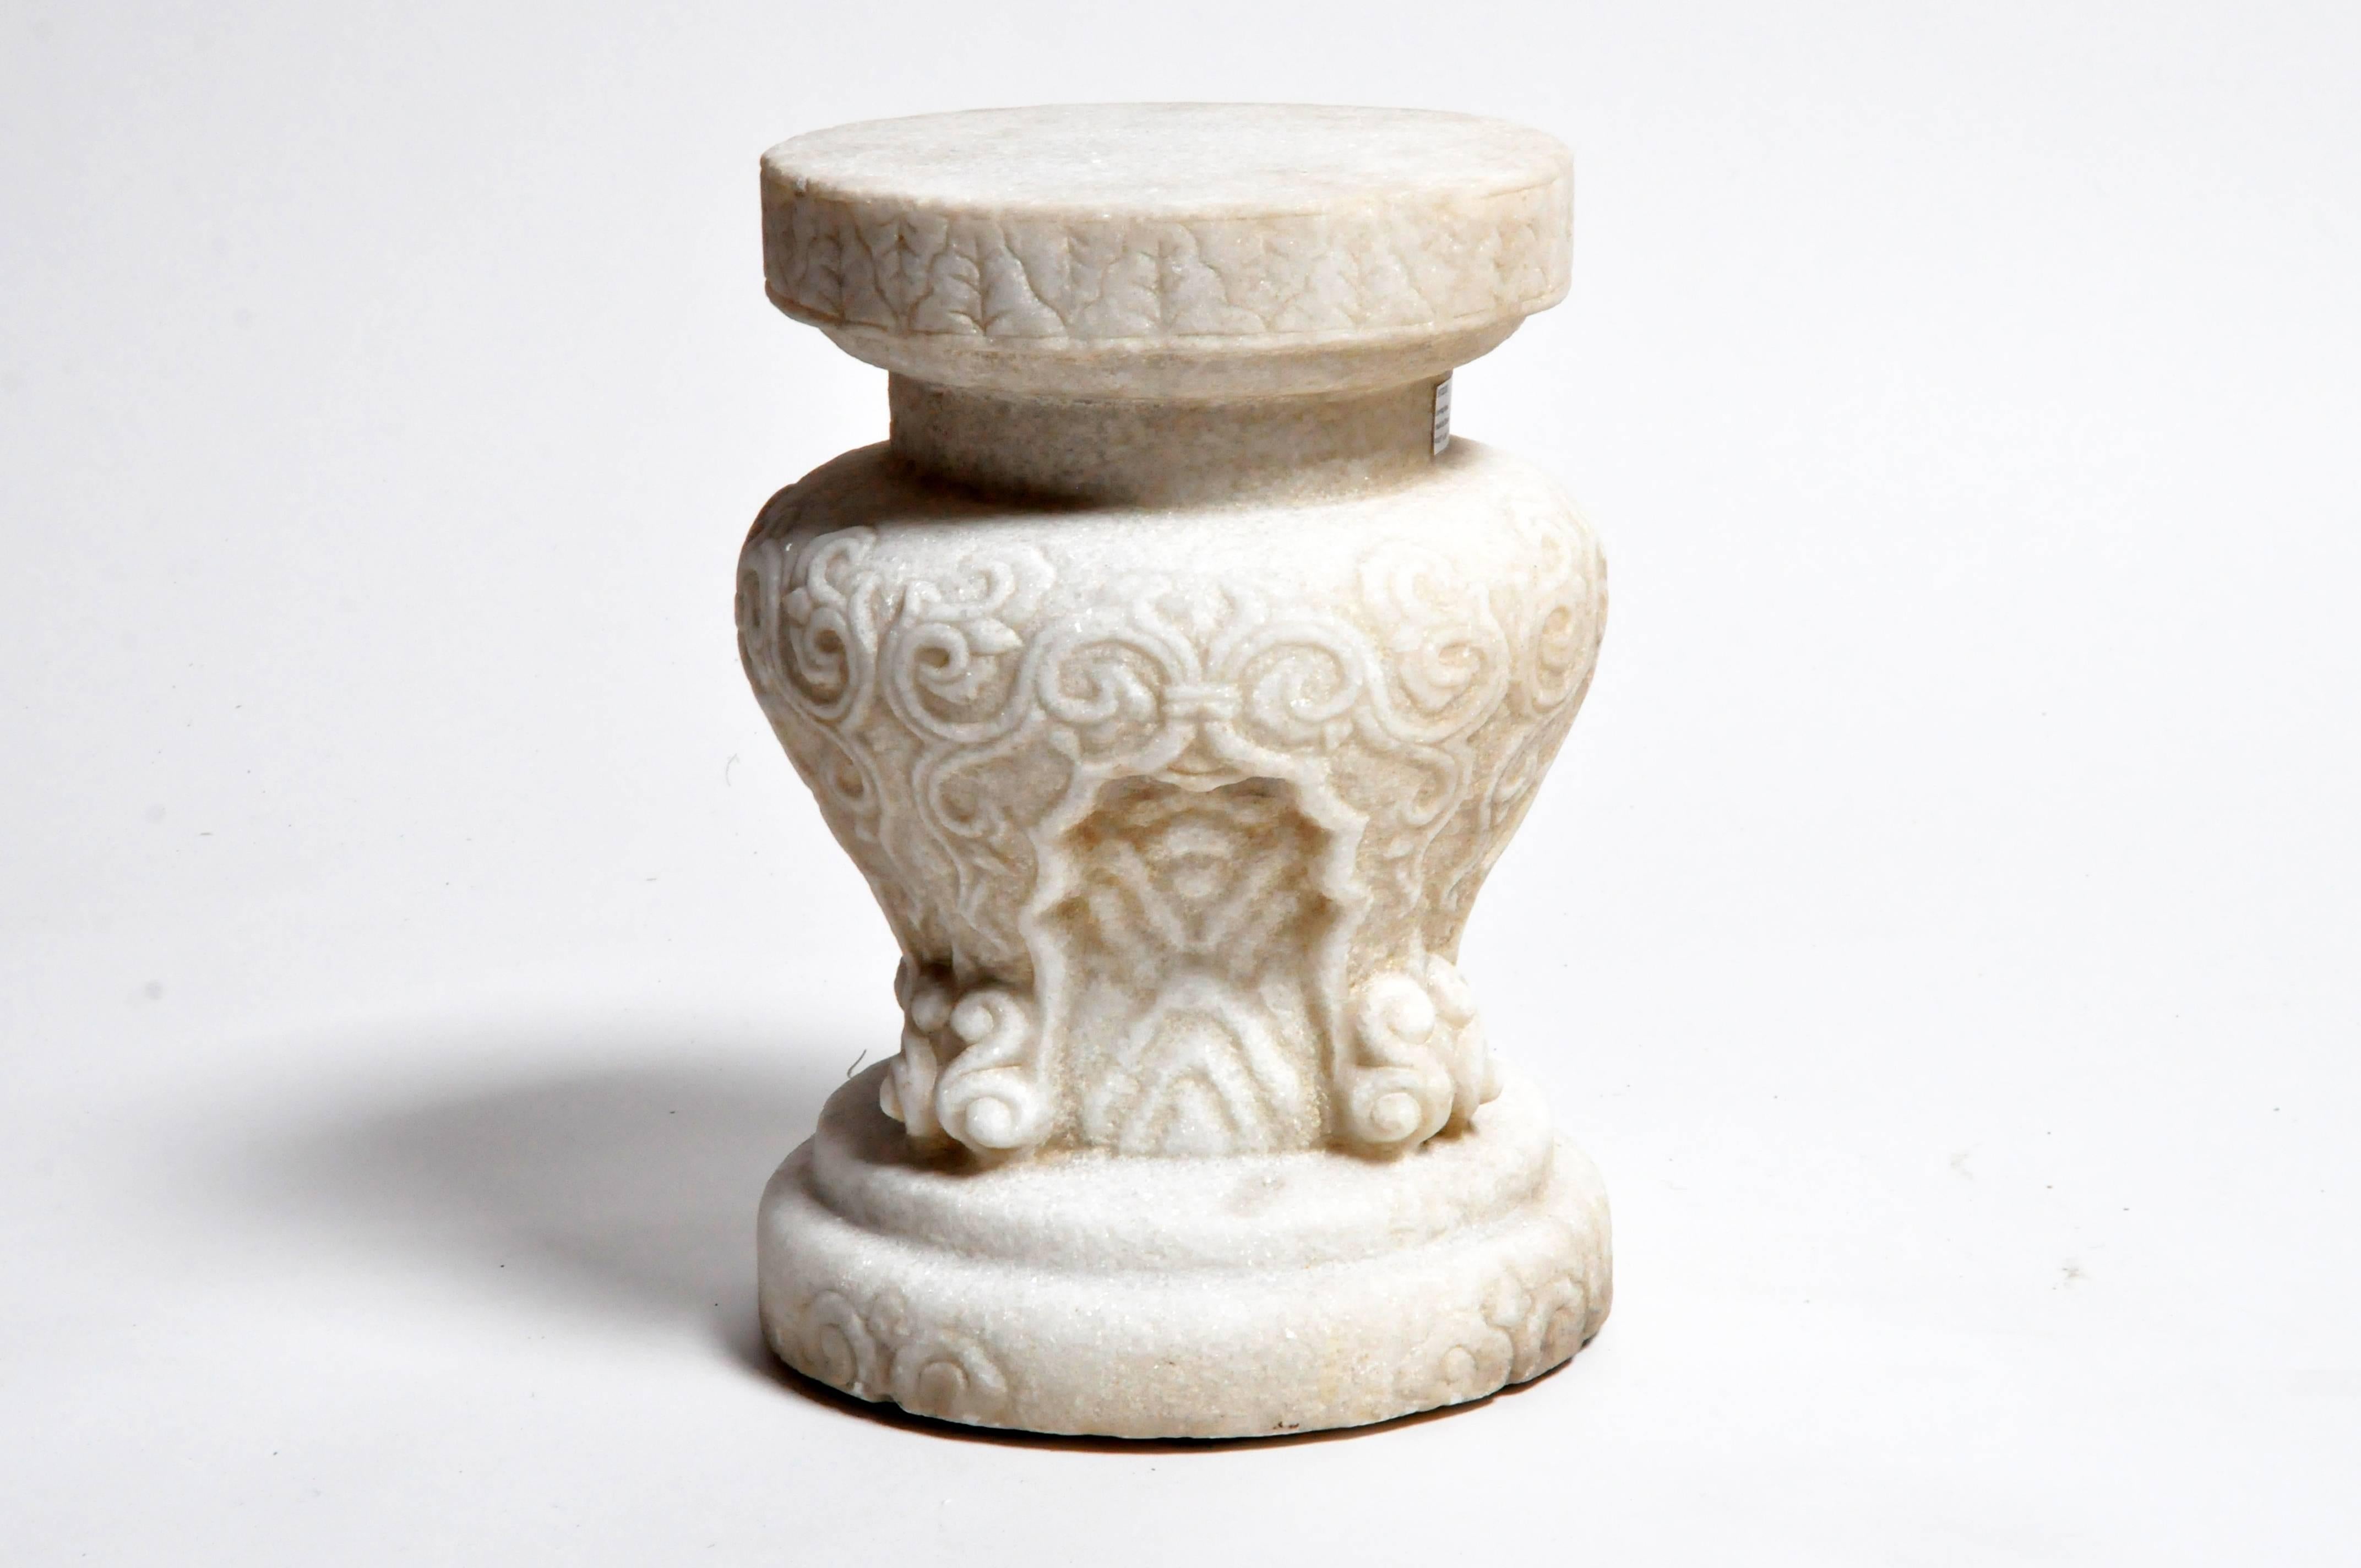 These beautiful garden stools are from Hebei, China and are made from marble.